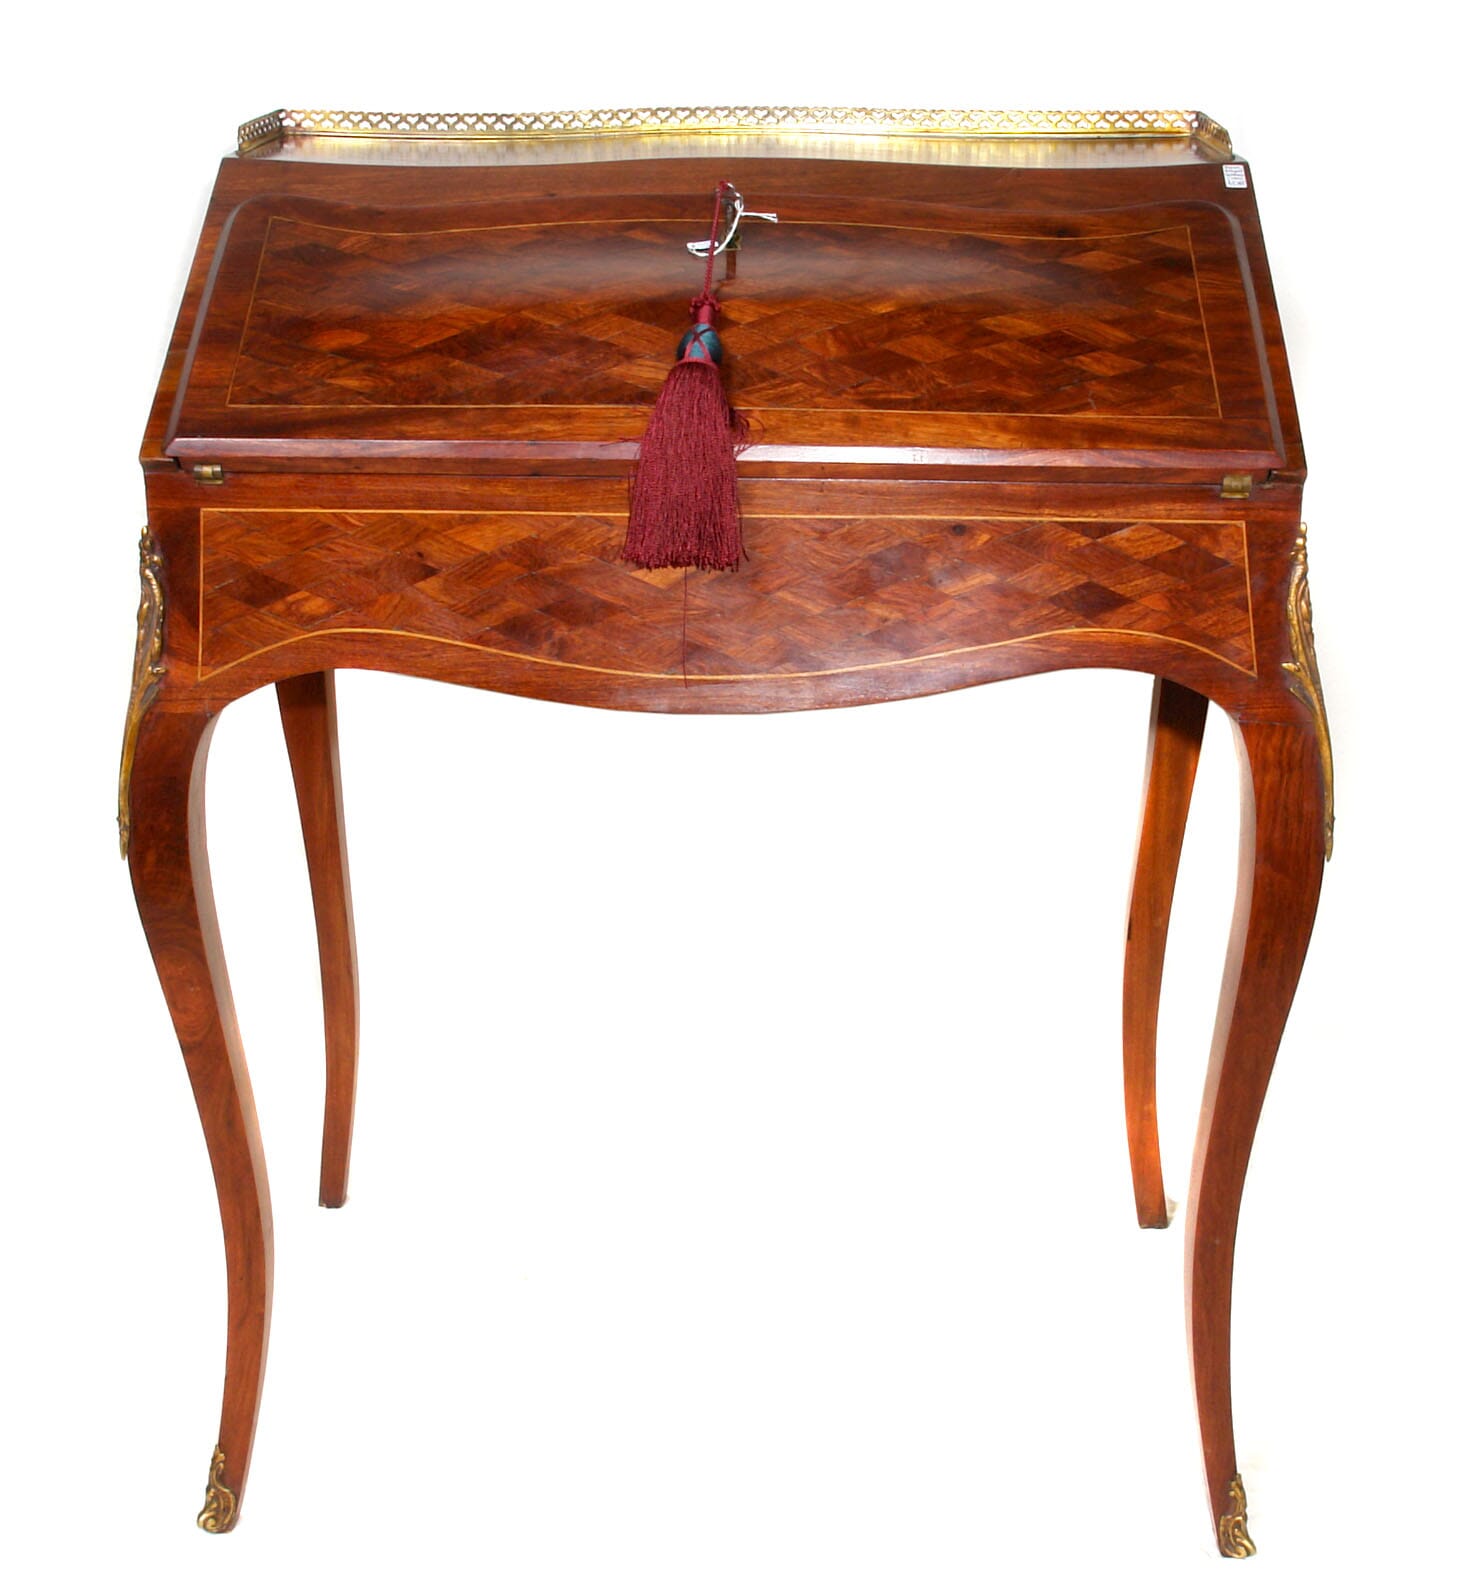 Fine French desk of small size, Kingwood with ormolu mounts, c.1890 -0